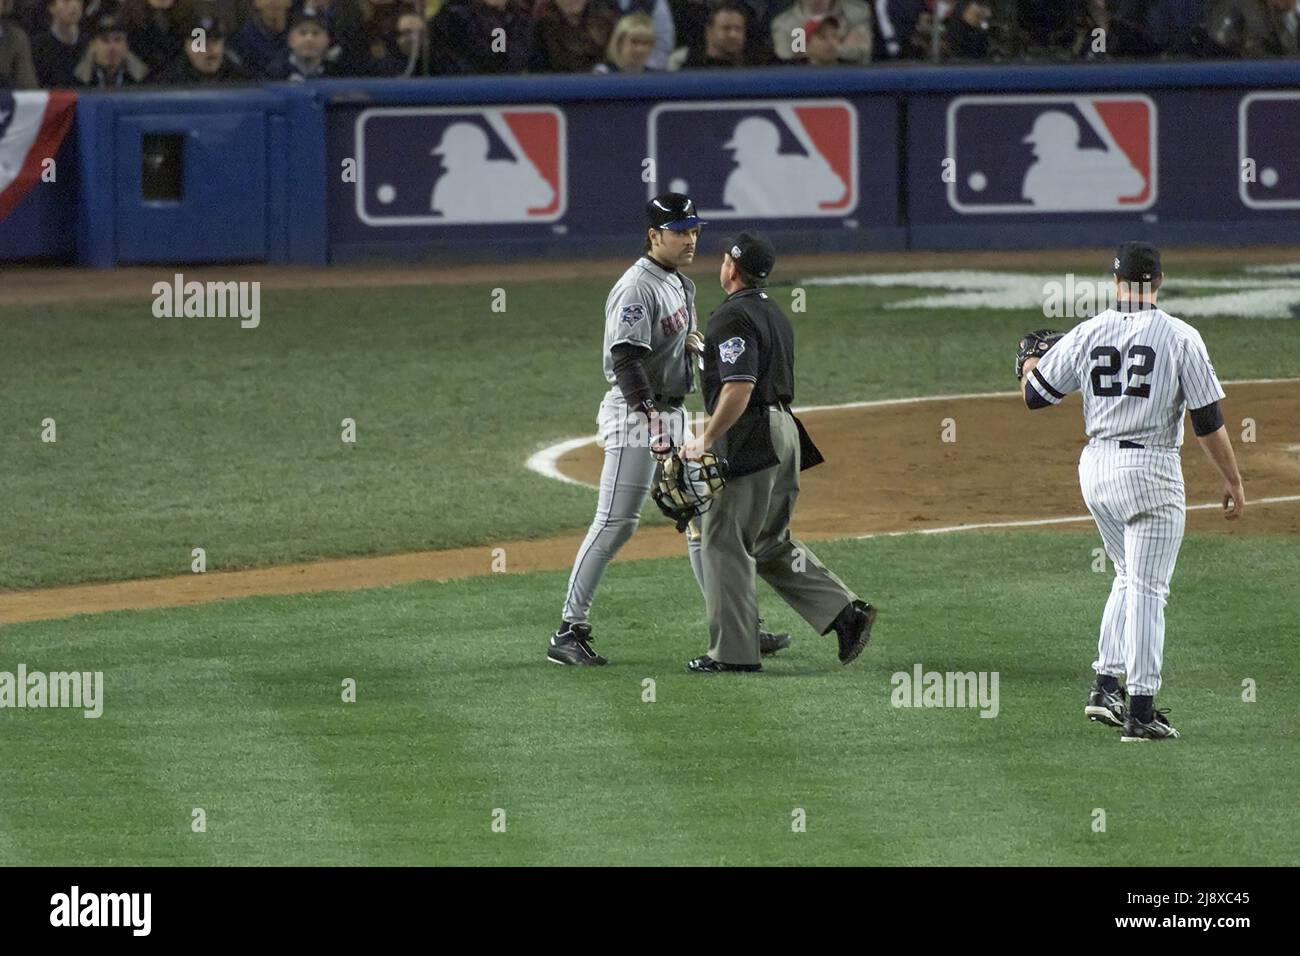 New York Mets batter Mike Piazza, left, confronts New York Yankees pitcher Roger Clemens after he threw a bat  during World Series Game 1 at Yankees Stadium in New York on October 22, 2000. Home plate umpire Charlie Reliford is shown in the middle. Photo by Francis Specker Stock Photo